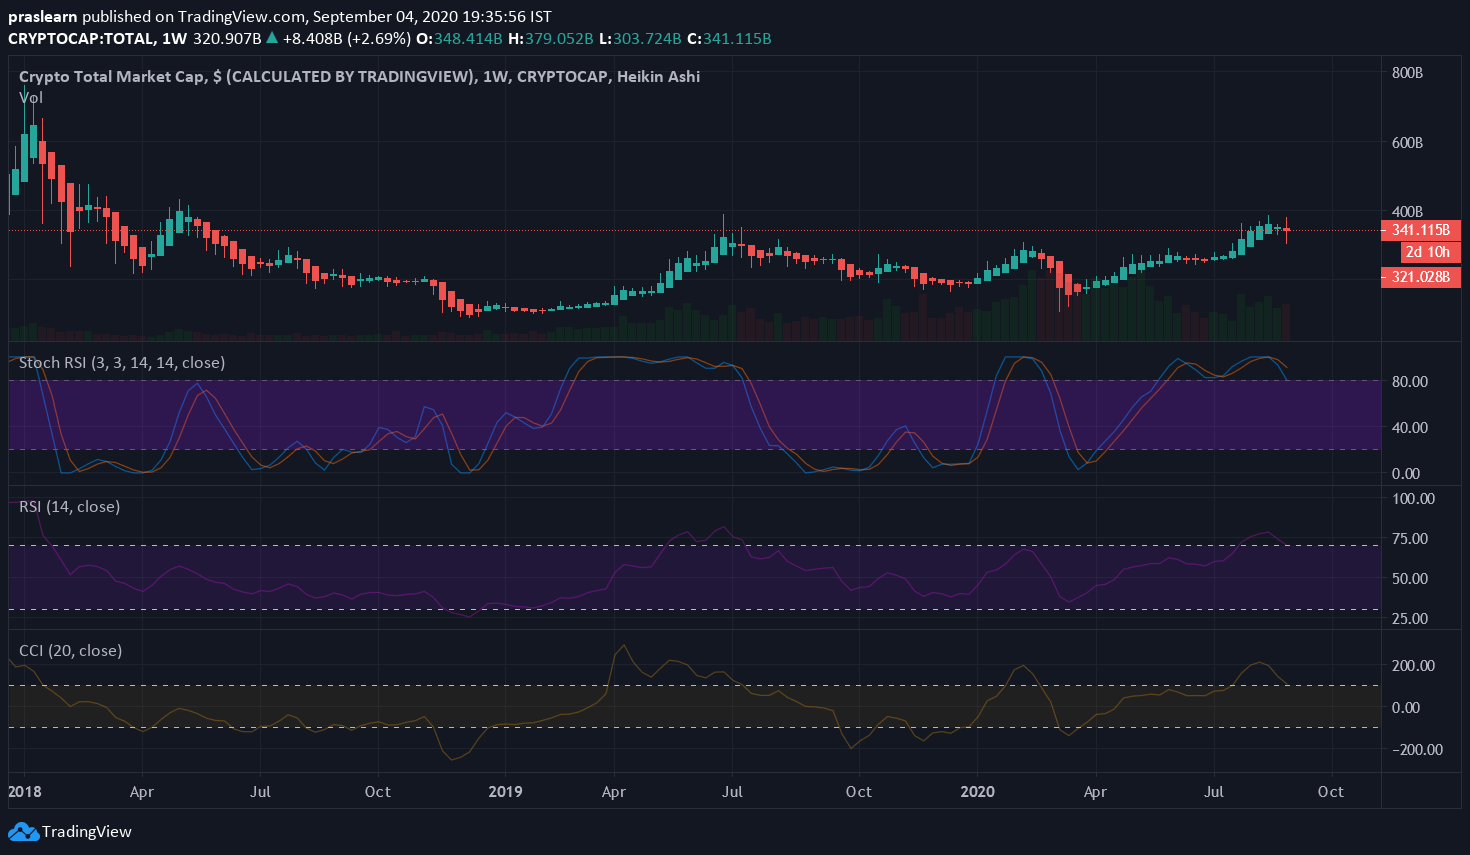 Cryptocurrency Market 1 Week Chart: Tradingview